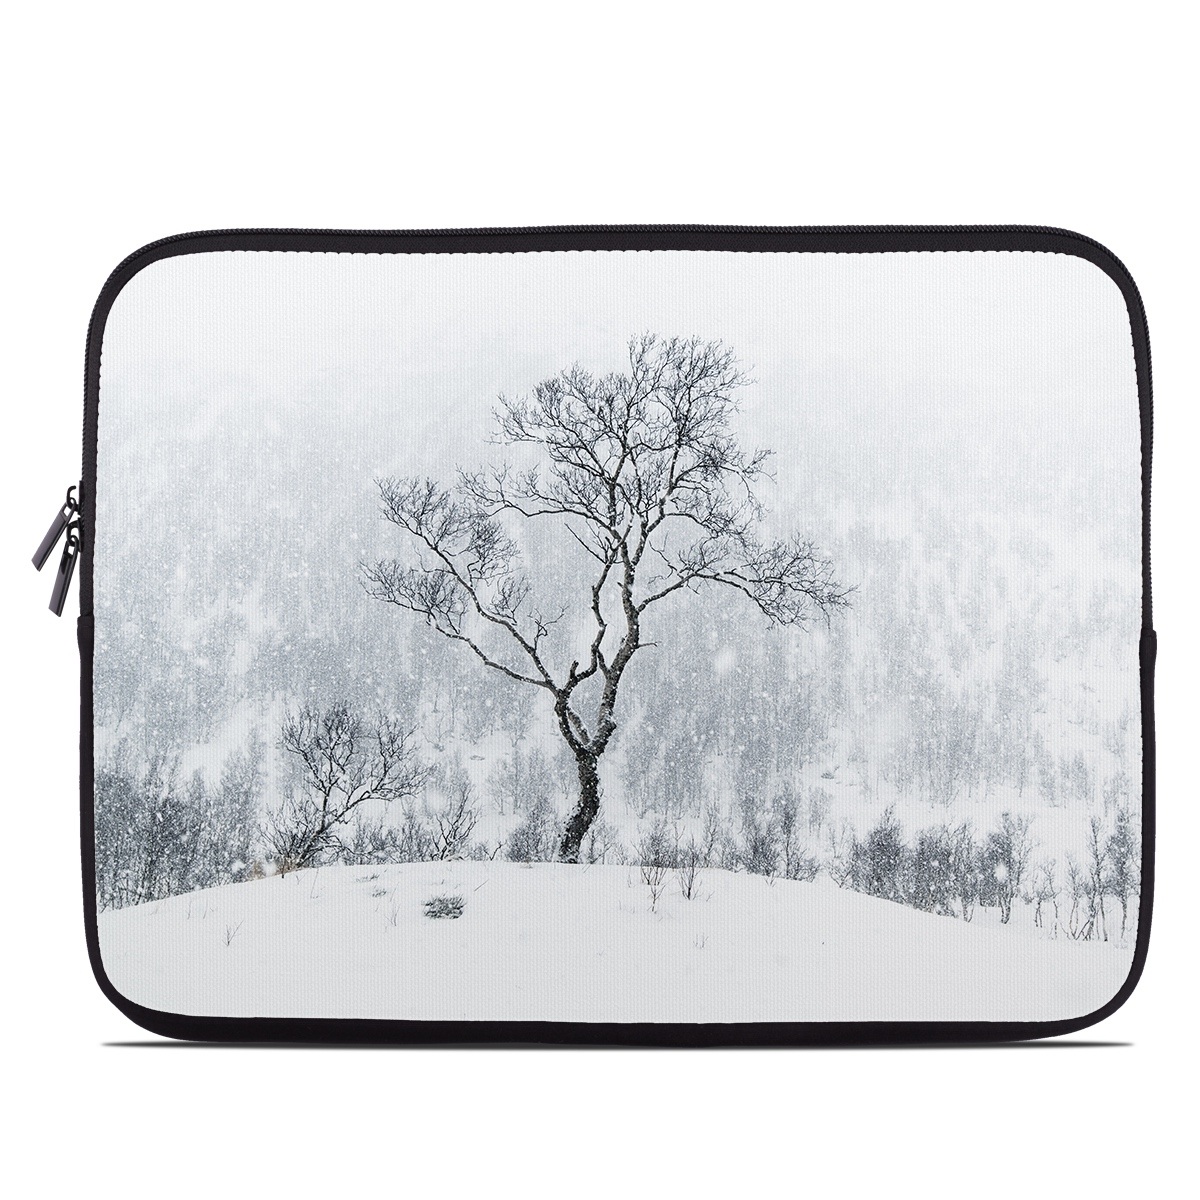 Laptop Sleeve - Winter Is Coming (Image 1)